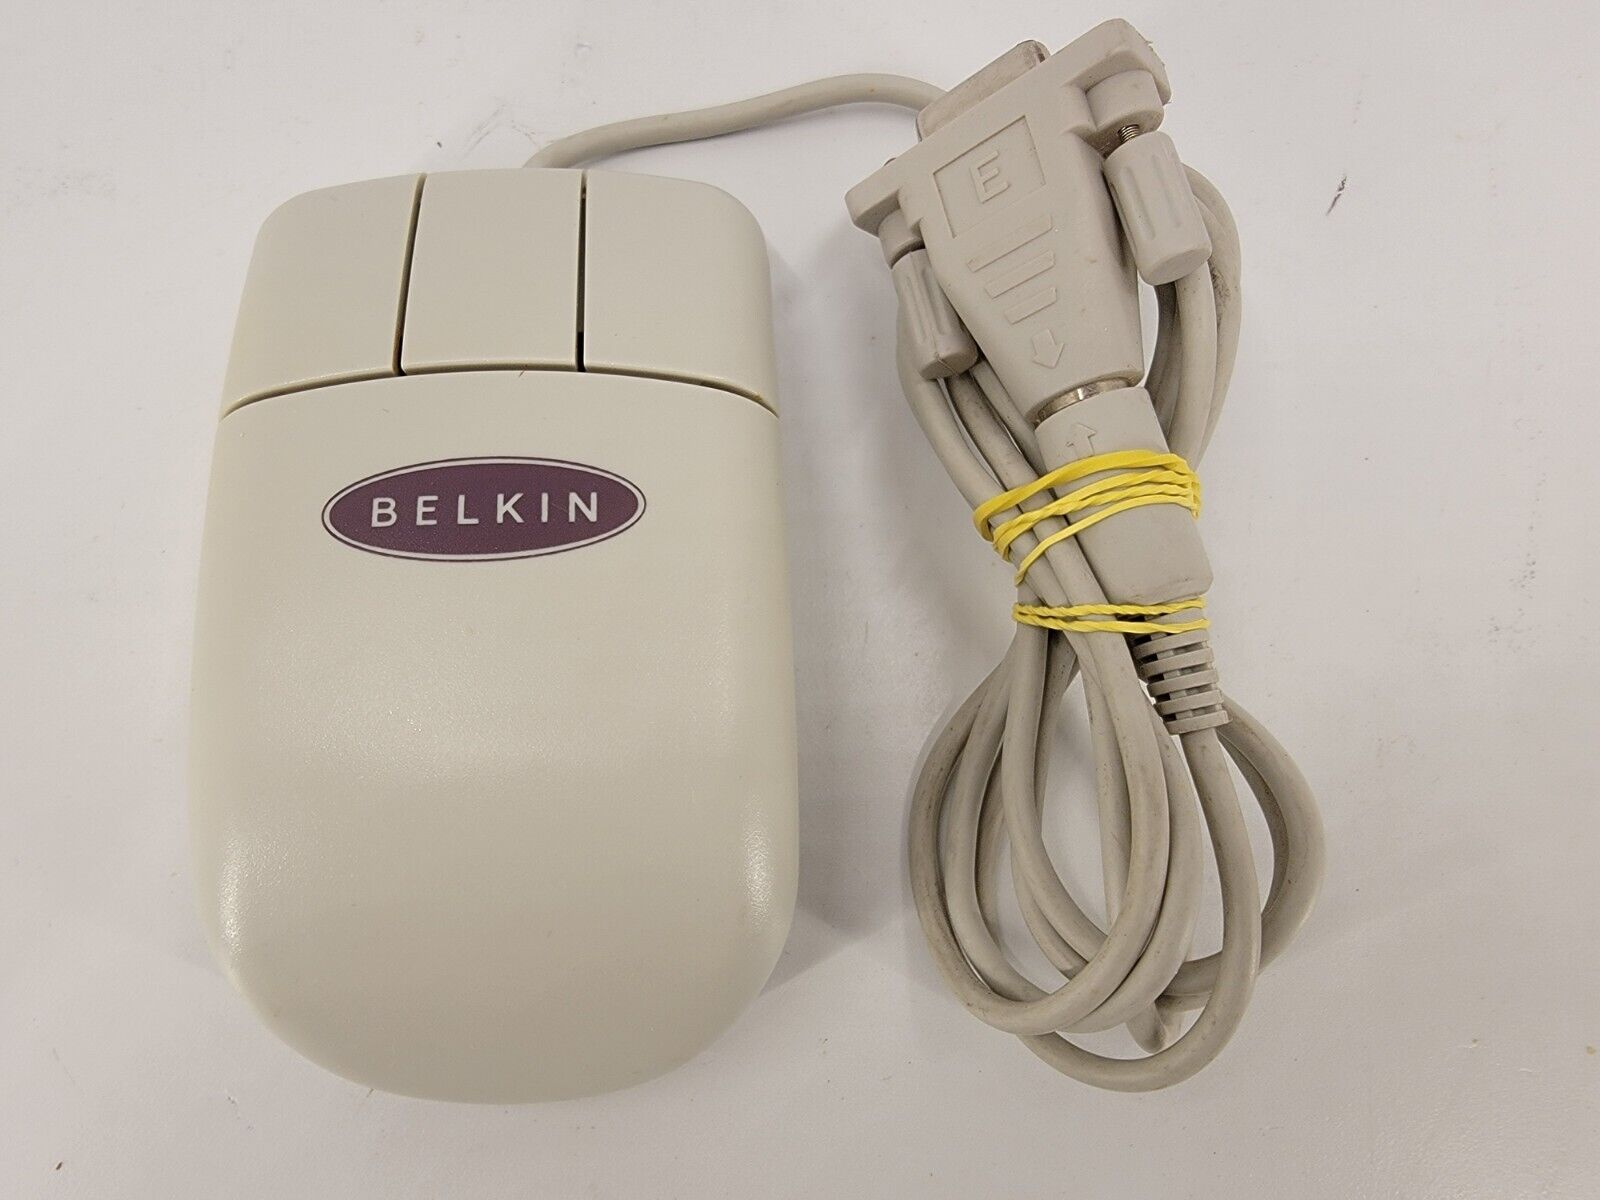 Vintage Belkin White 3-Button Wired USB Serial & PS/2 Mouse F8E201 TESTED WORKS